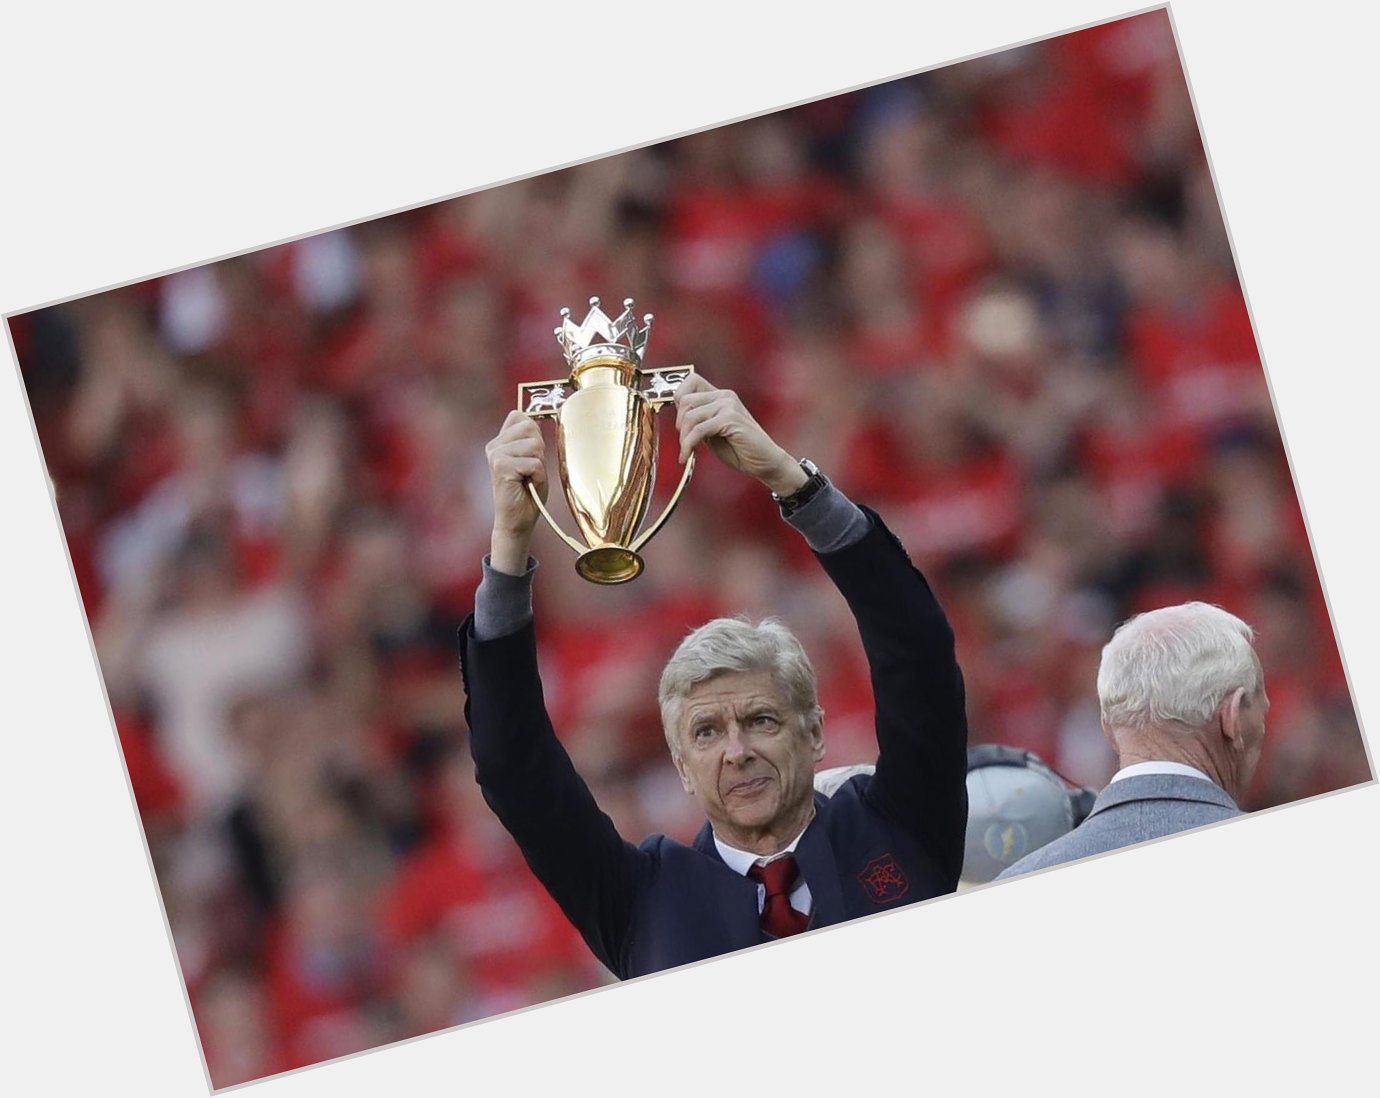 Happy birthday, Arsene Wenger! The ex-Arsenal manager turns 72 today, and what memories he has made. 